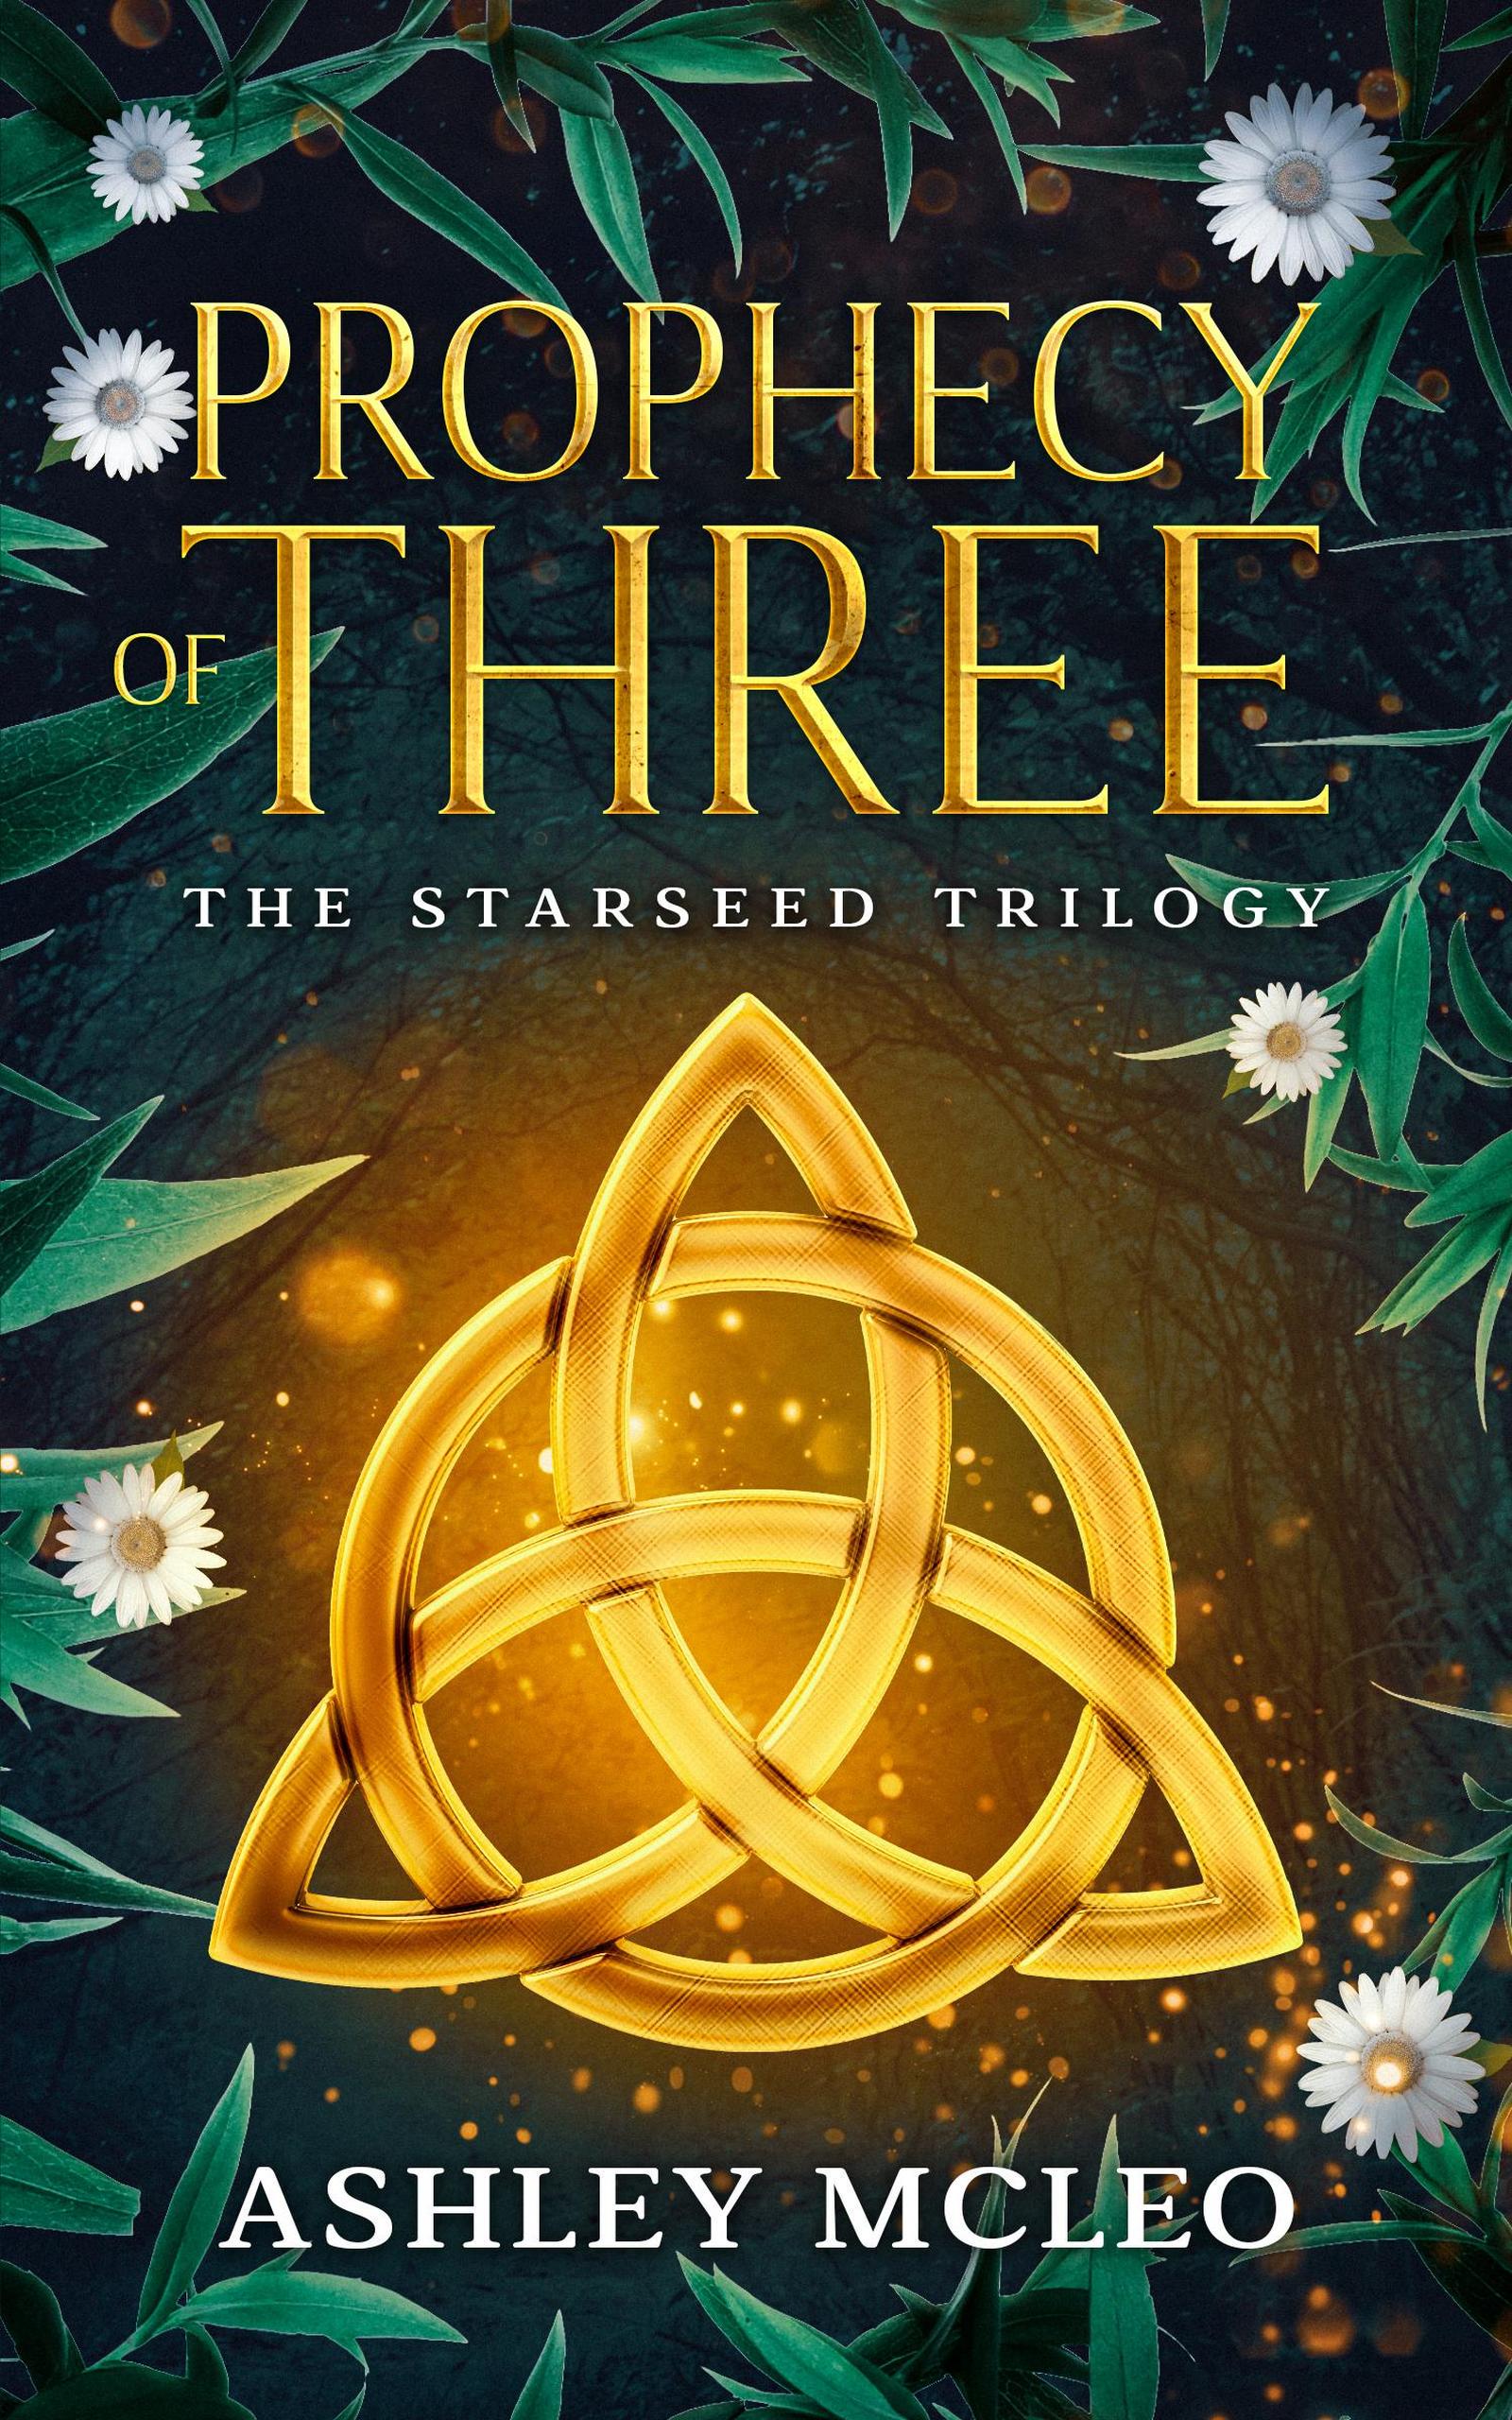 Prophecy of Three by Ashley McLeo